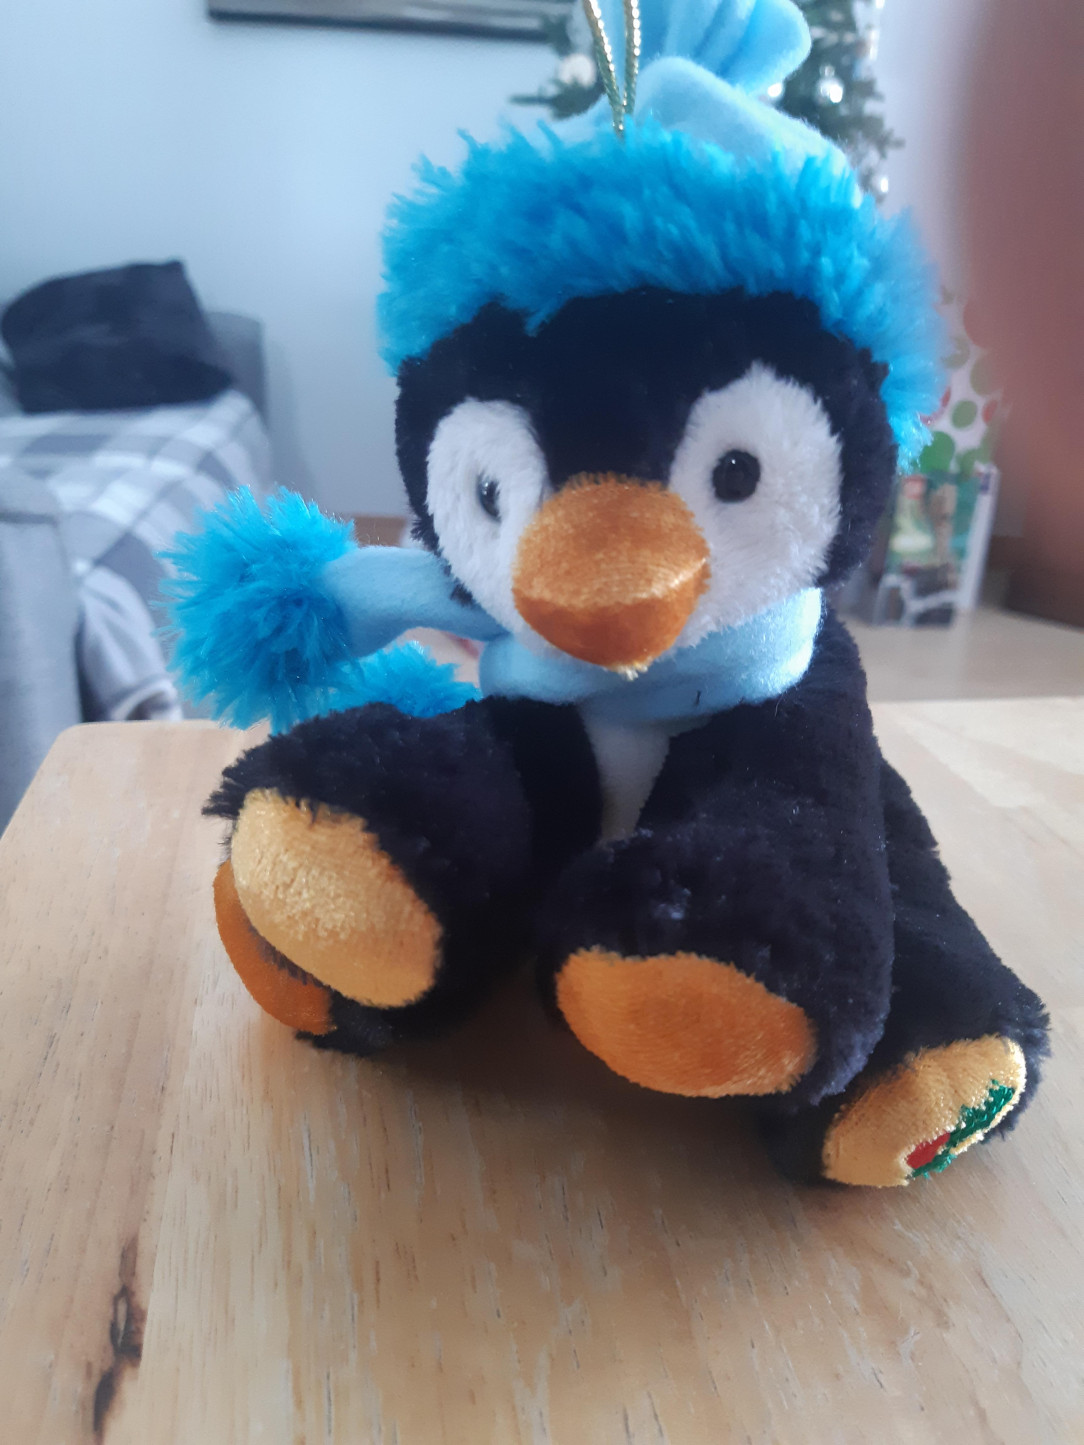 This plush of a penguin has 4 paws like a bear